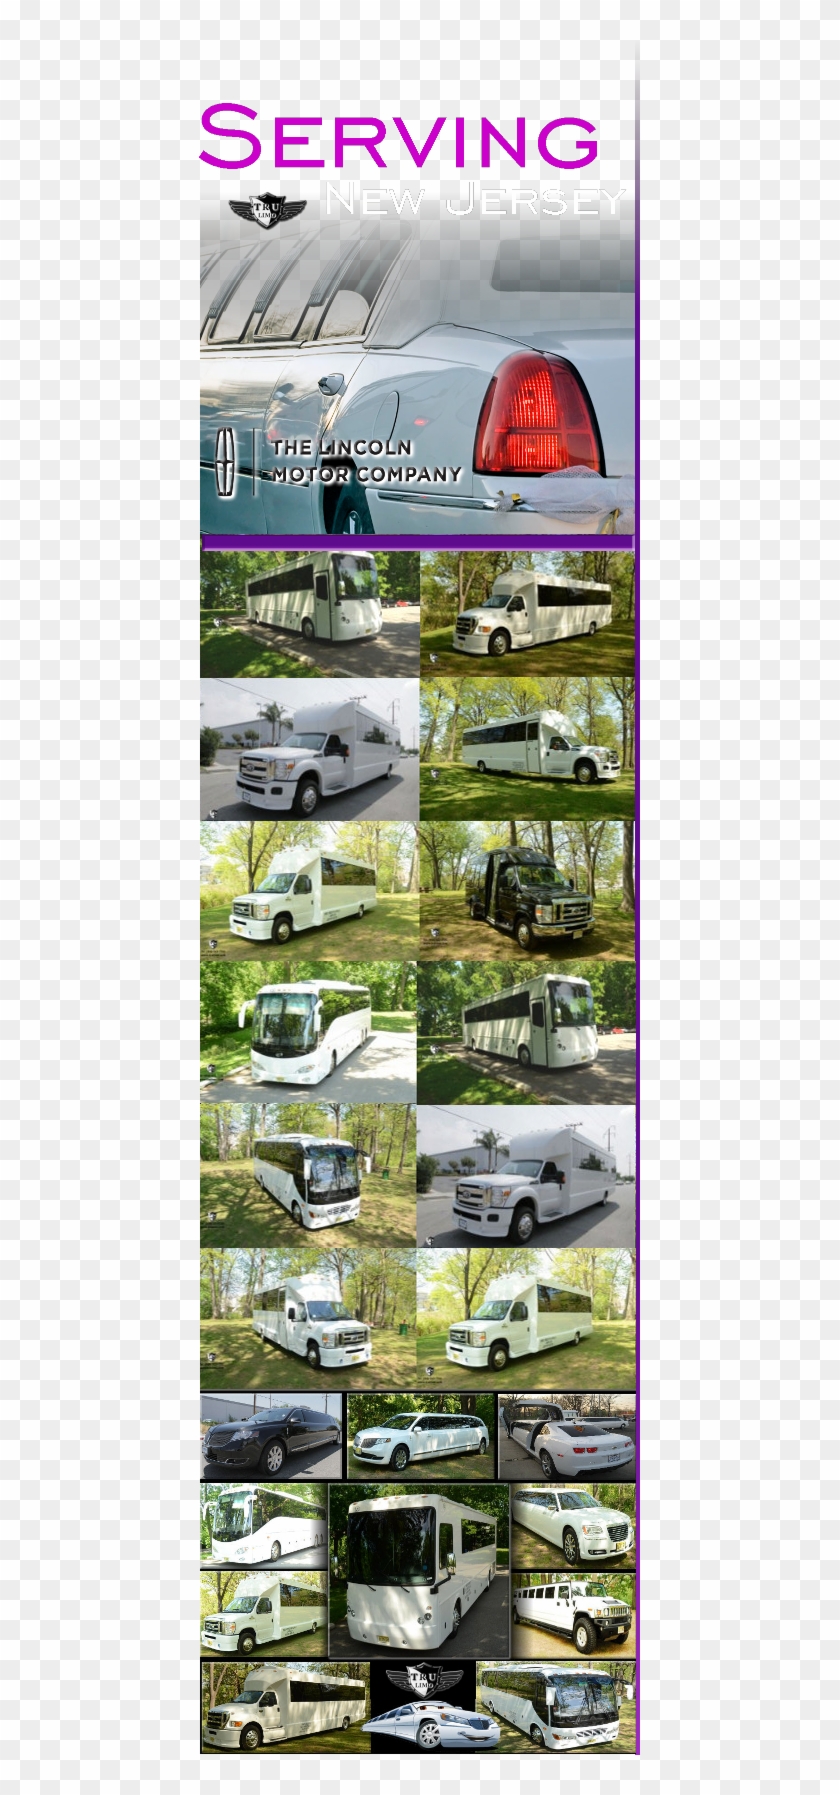 Nj Townships Party Bus Limos Party Bus Nj Limo Service - Gmc Motorhome Clipart #5416569